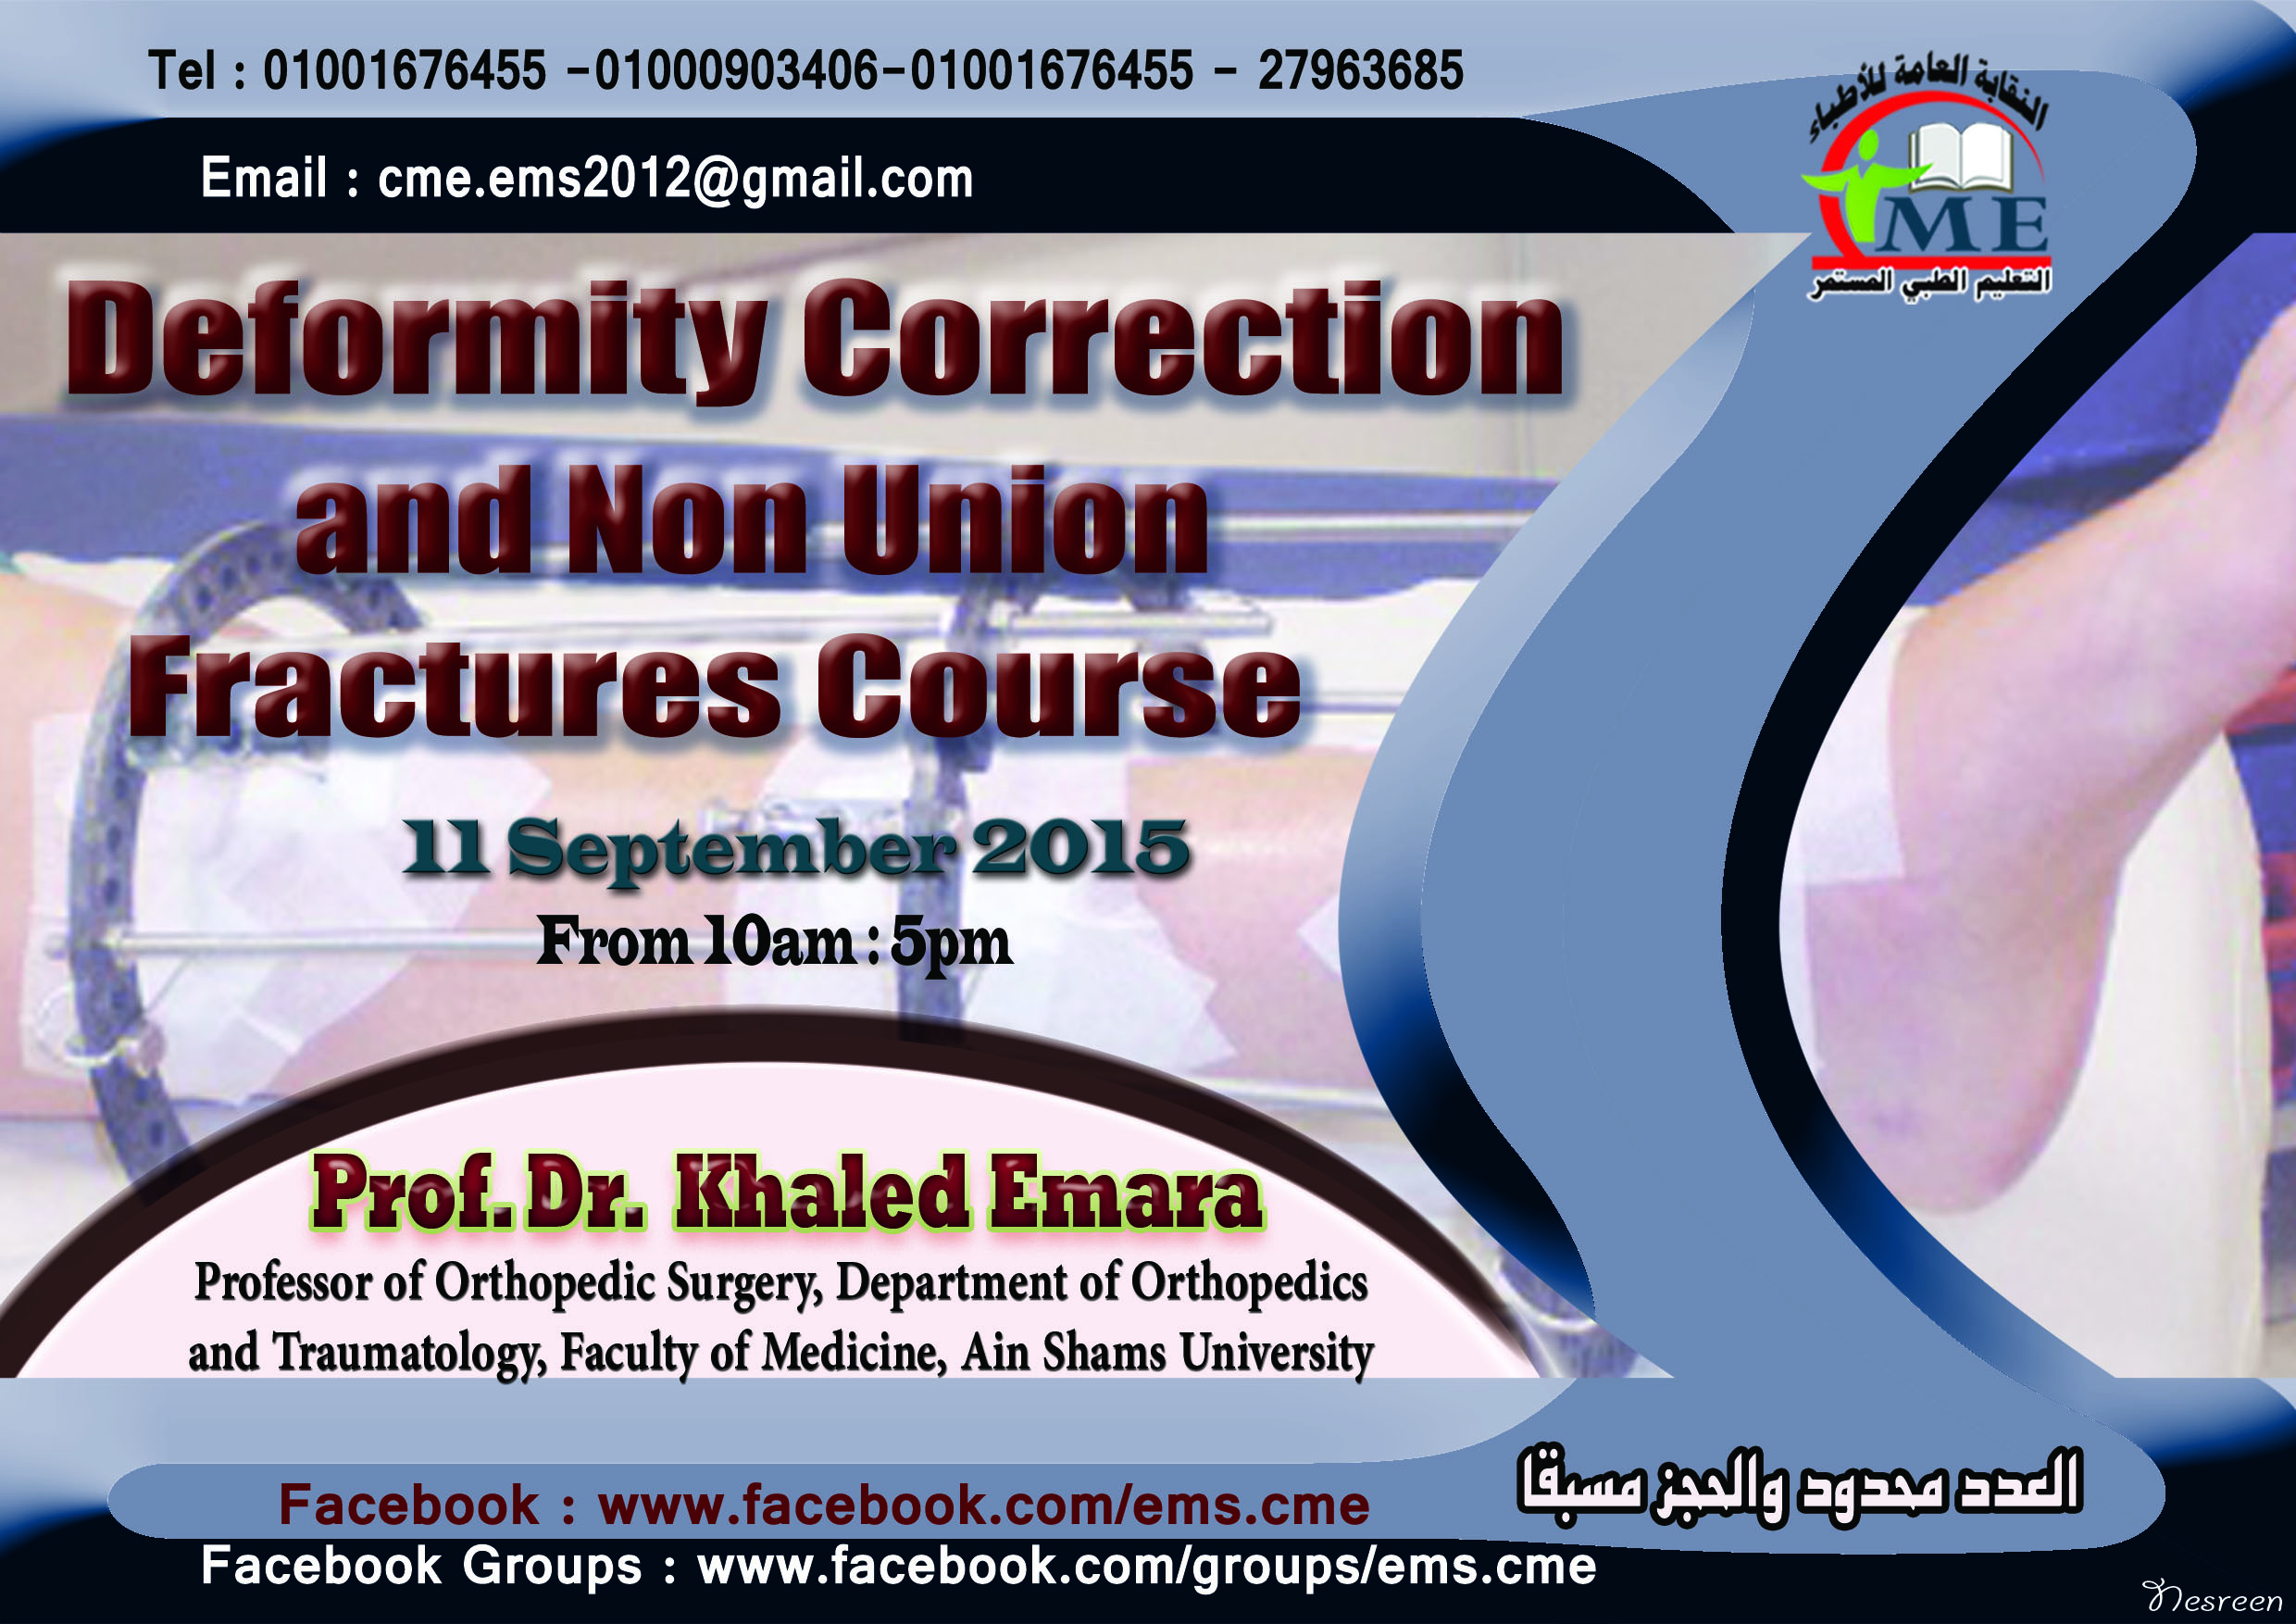 Deformity Correction and Non Union Fractures Course